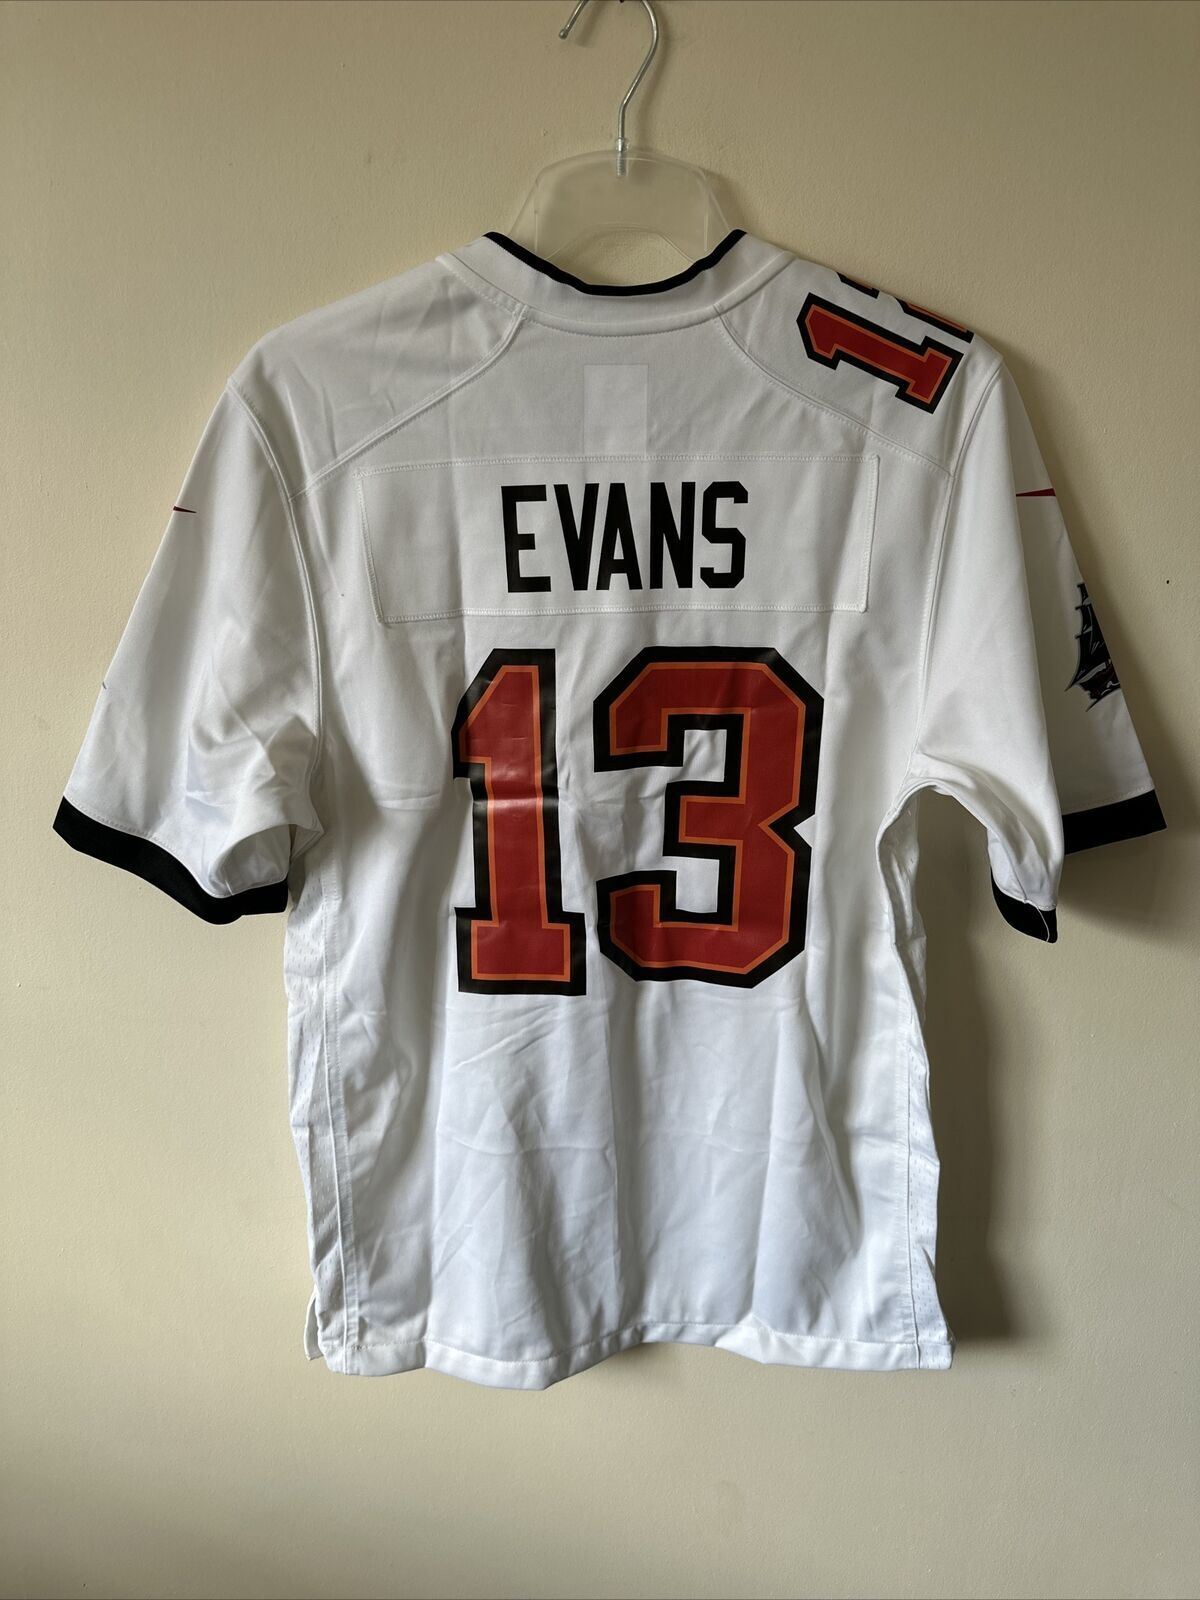 Nike NFL Tampa Bay Buccaneers Jersey EVANS 13 Mens Size Small